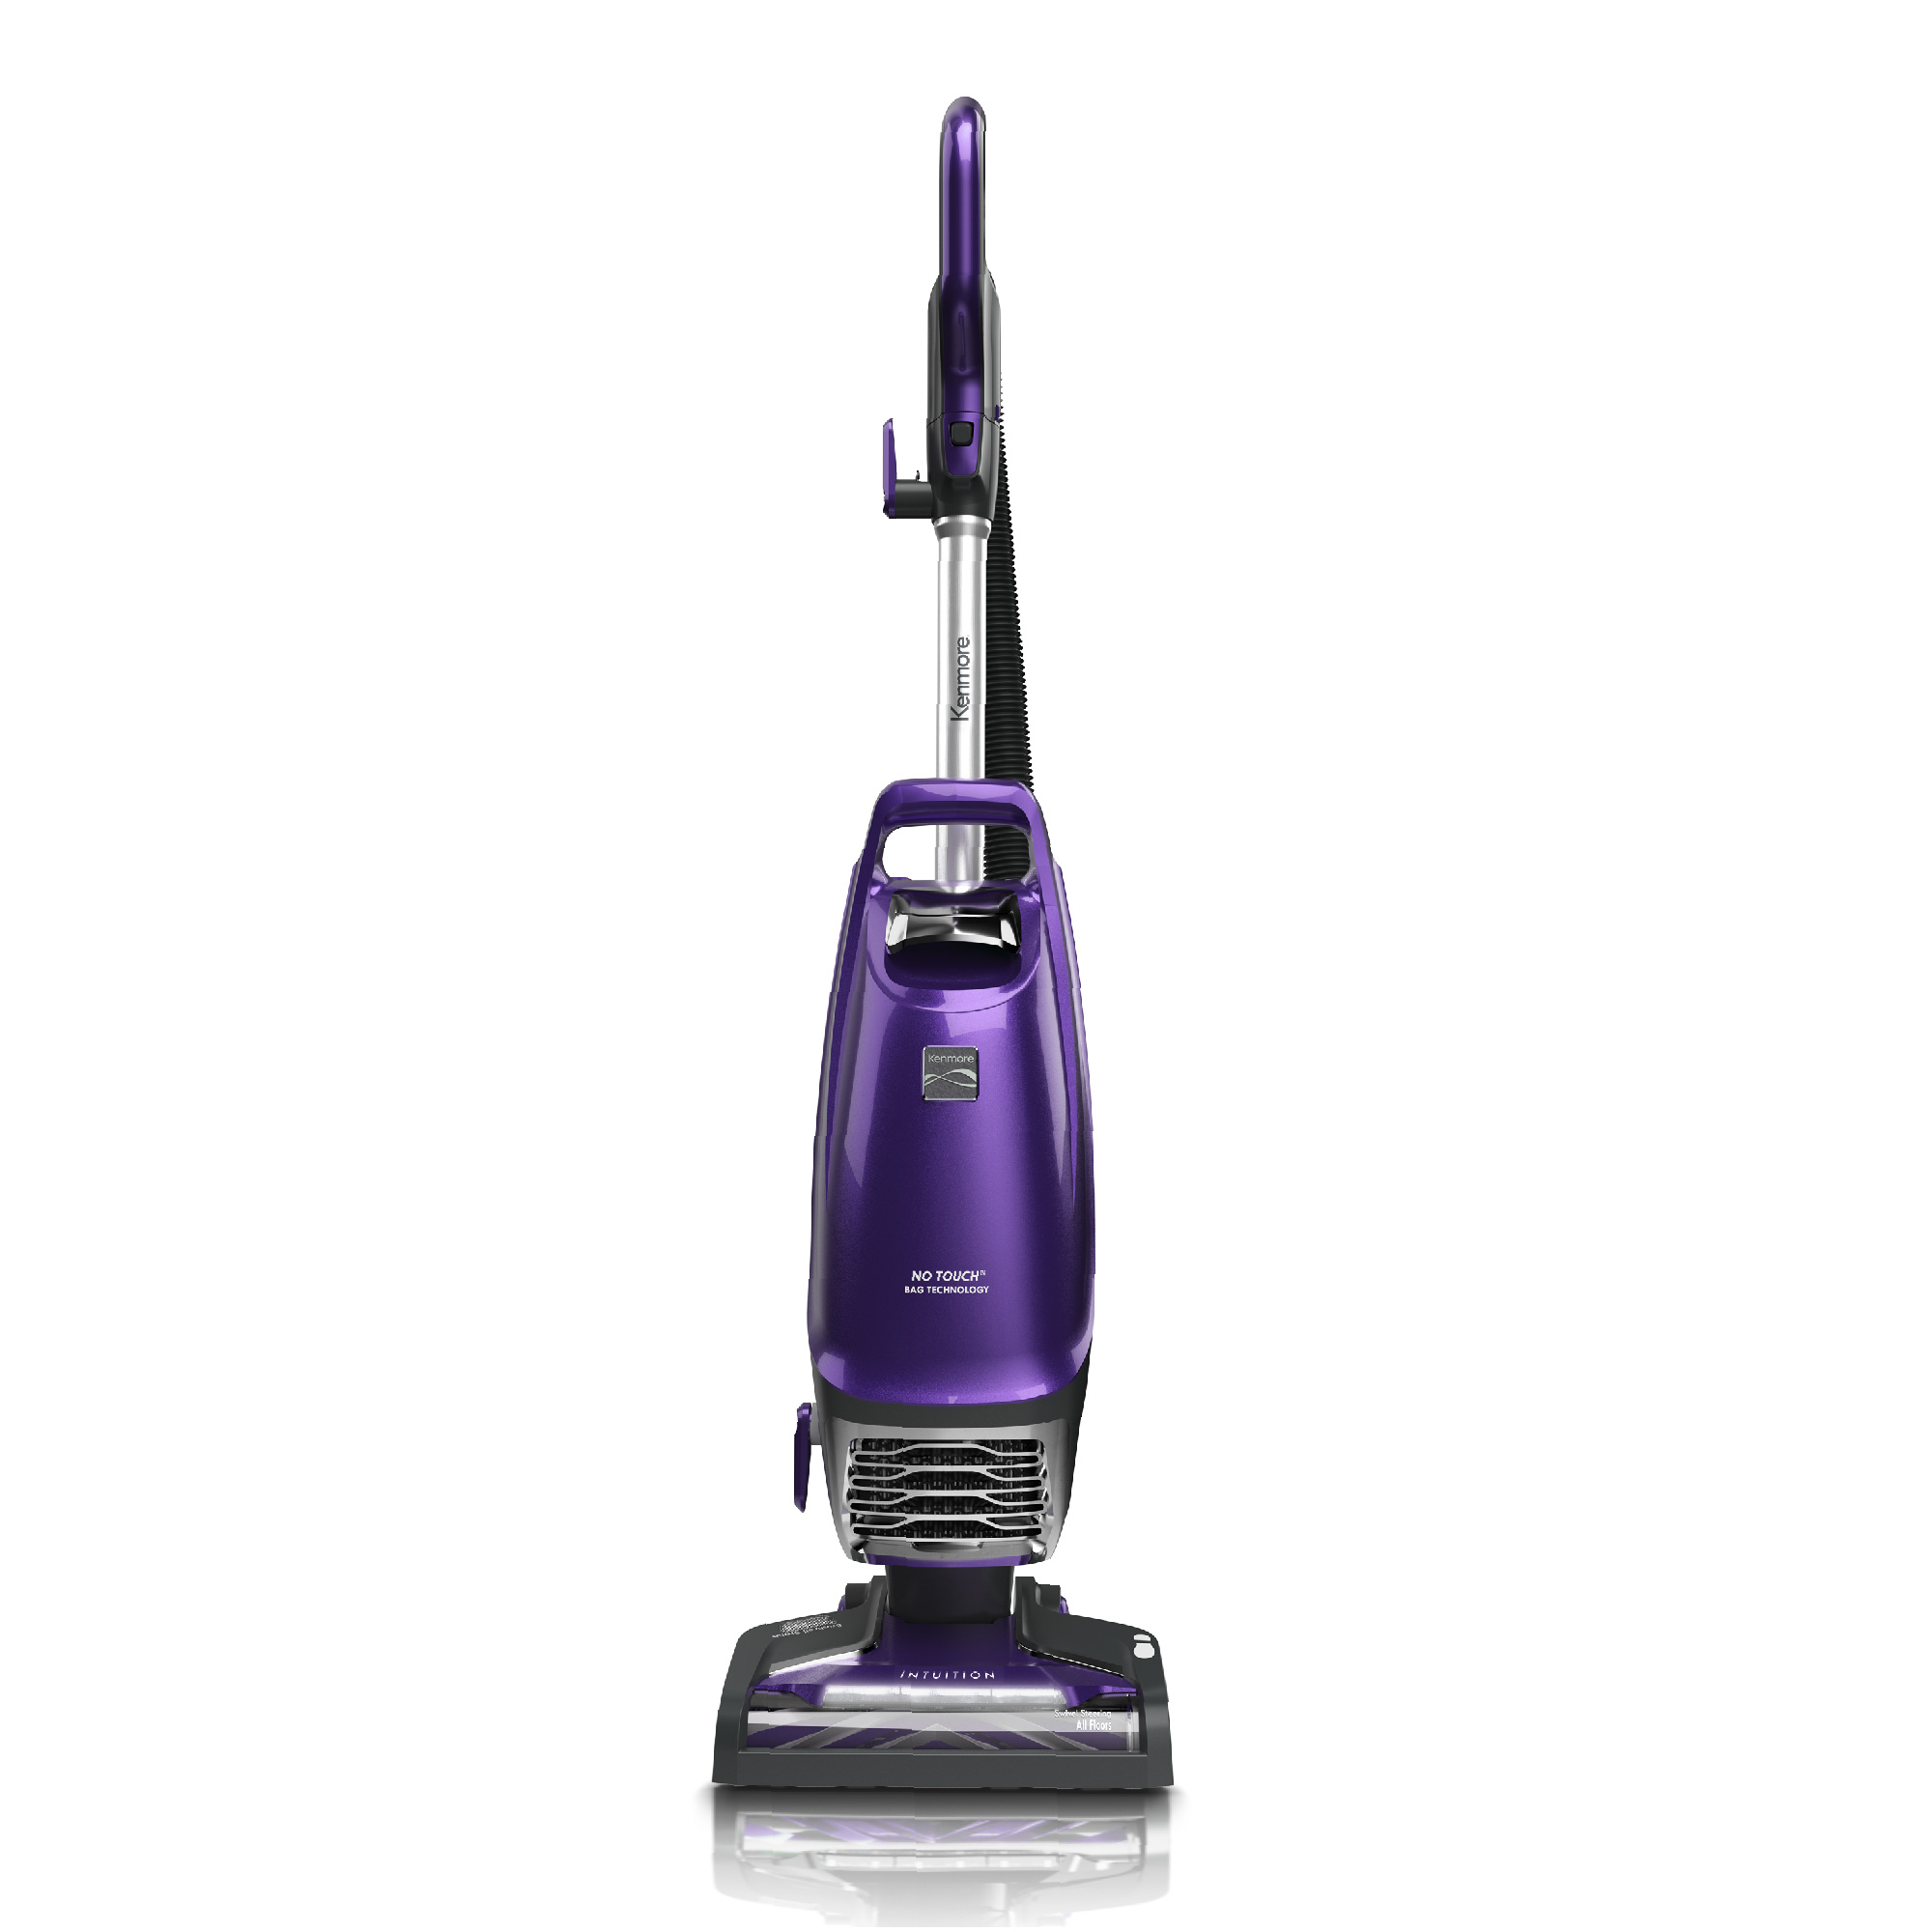 Kenmore Intuition BU4018 Bagged Upright Vacuum - image 1 of 11